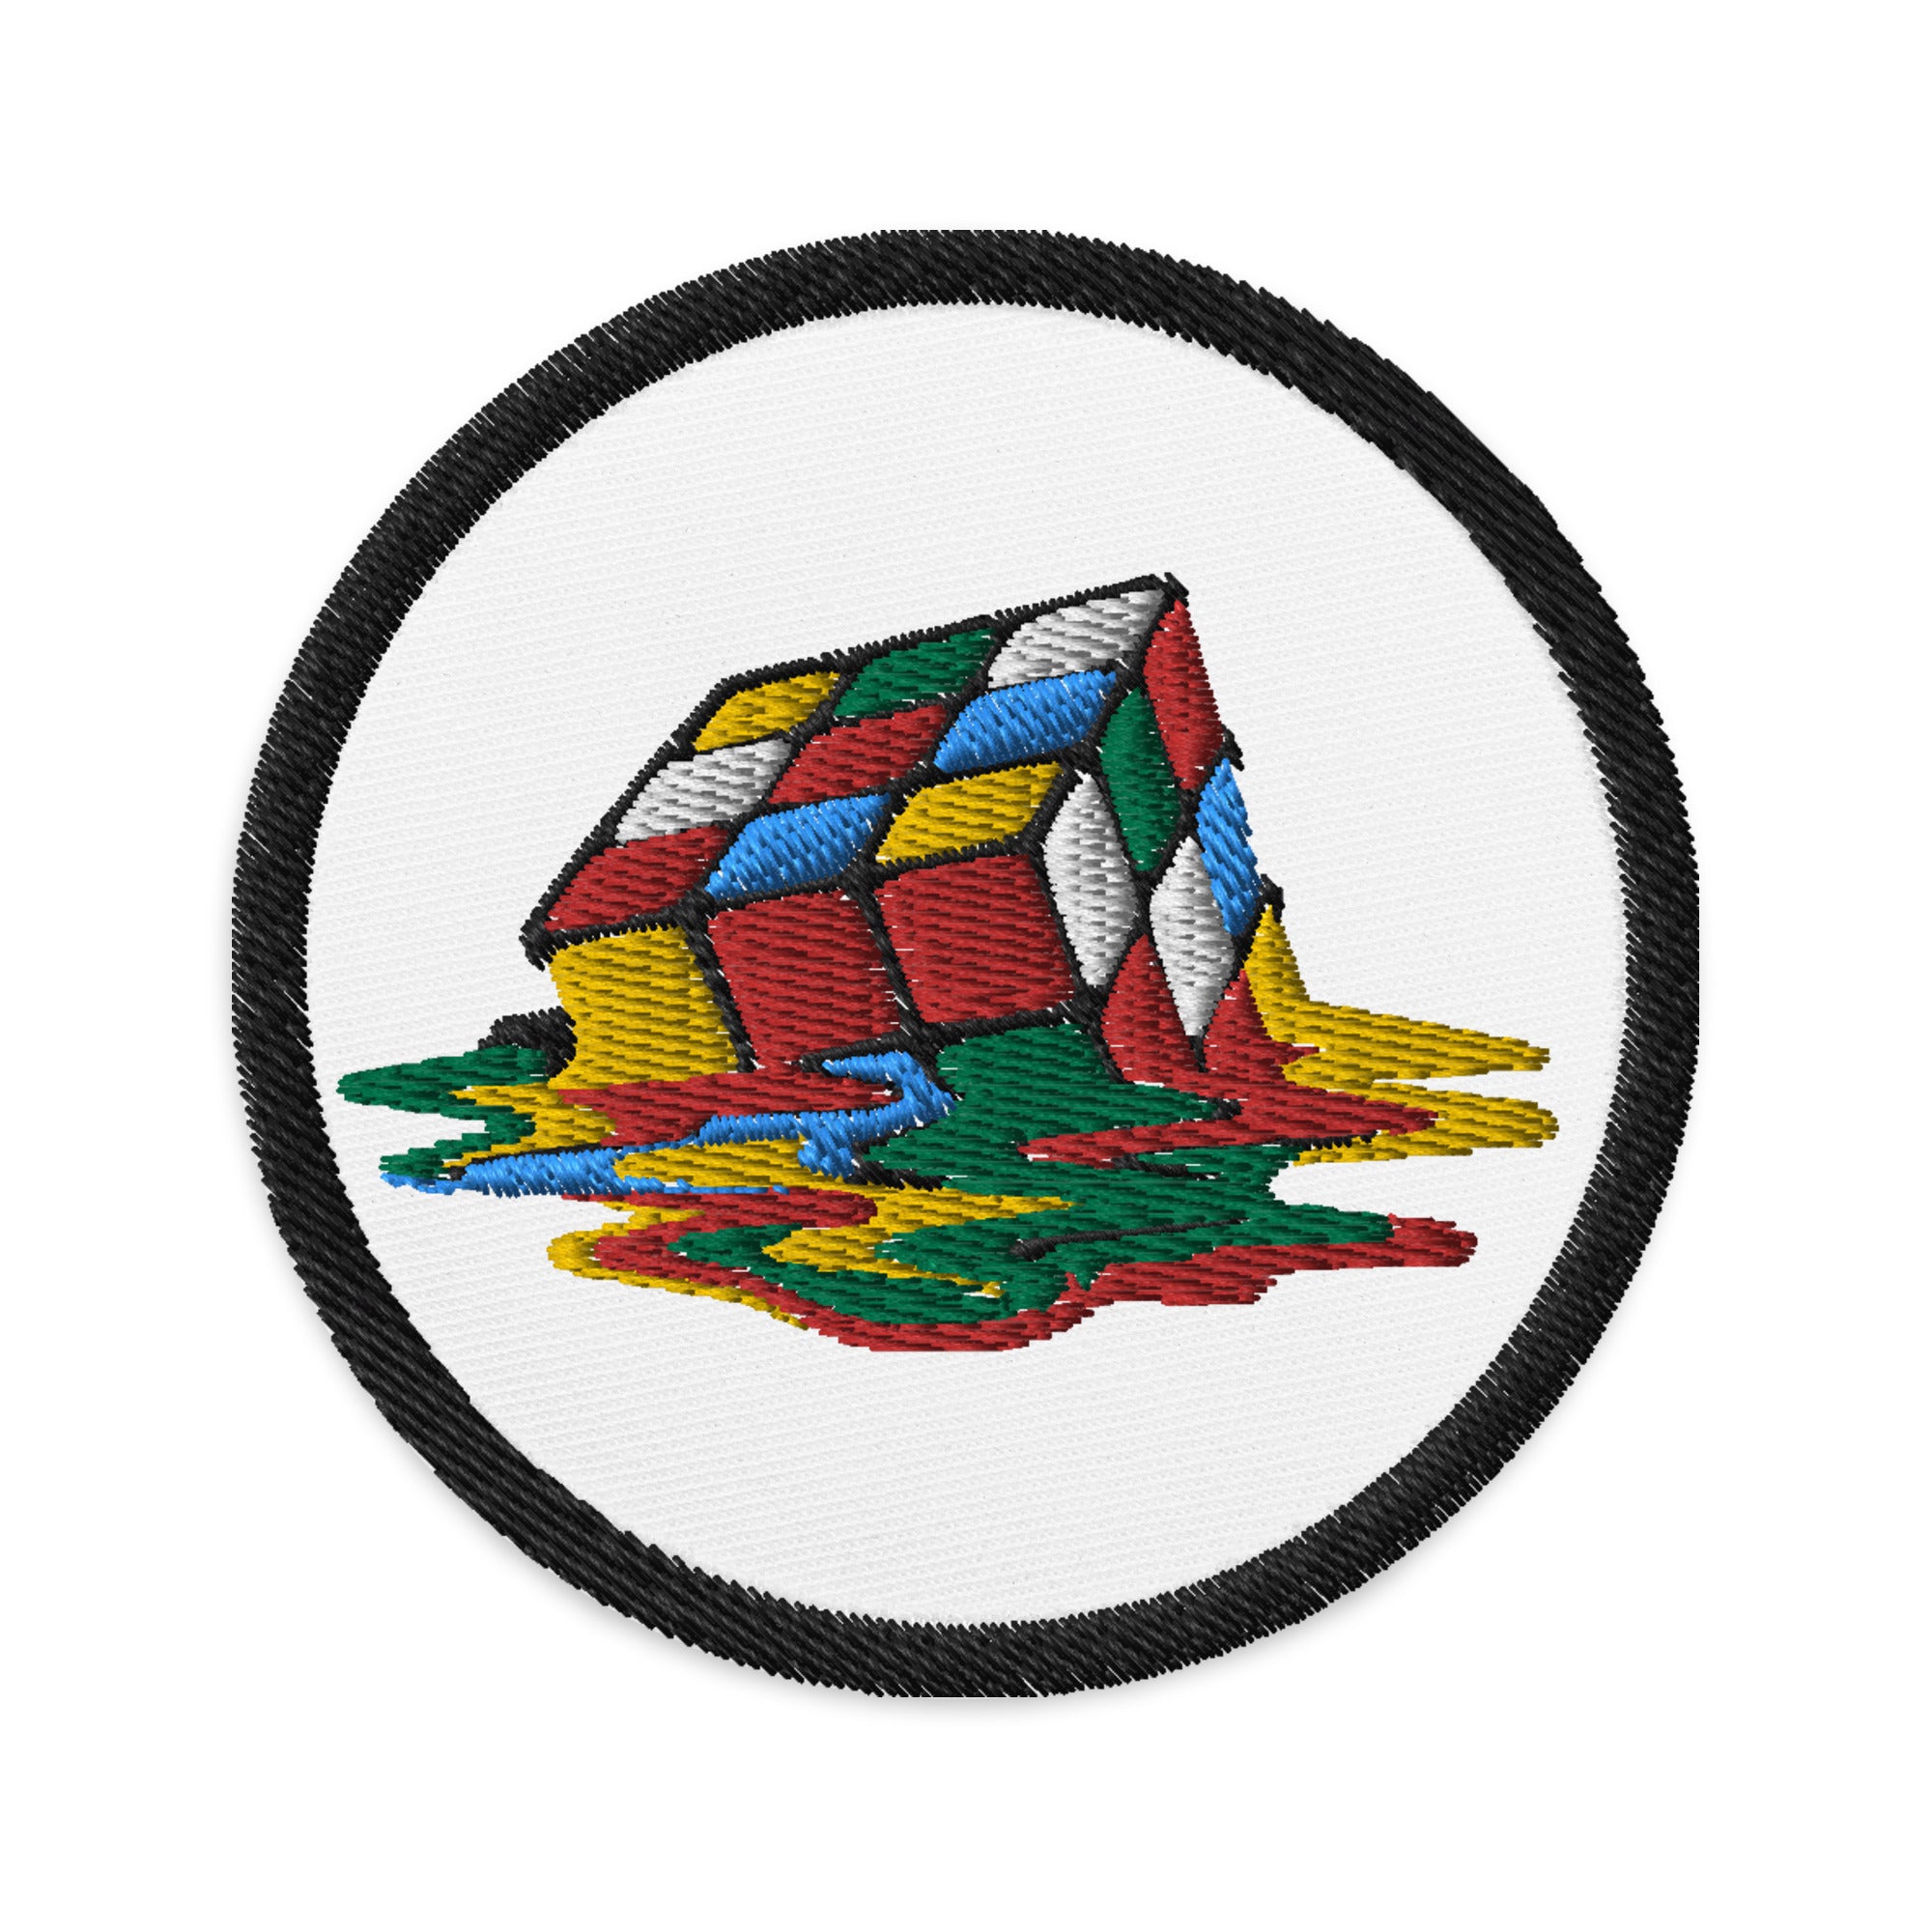 Melting Speed Cube Gaming Puzzle Box Embroidered Patch Rubik's Cube - Edge of Life Designs